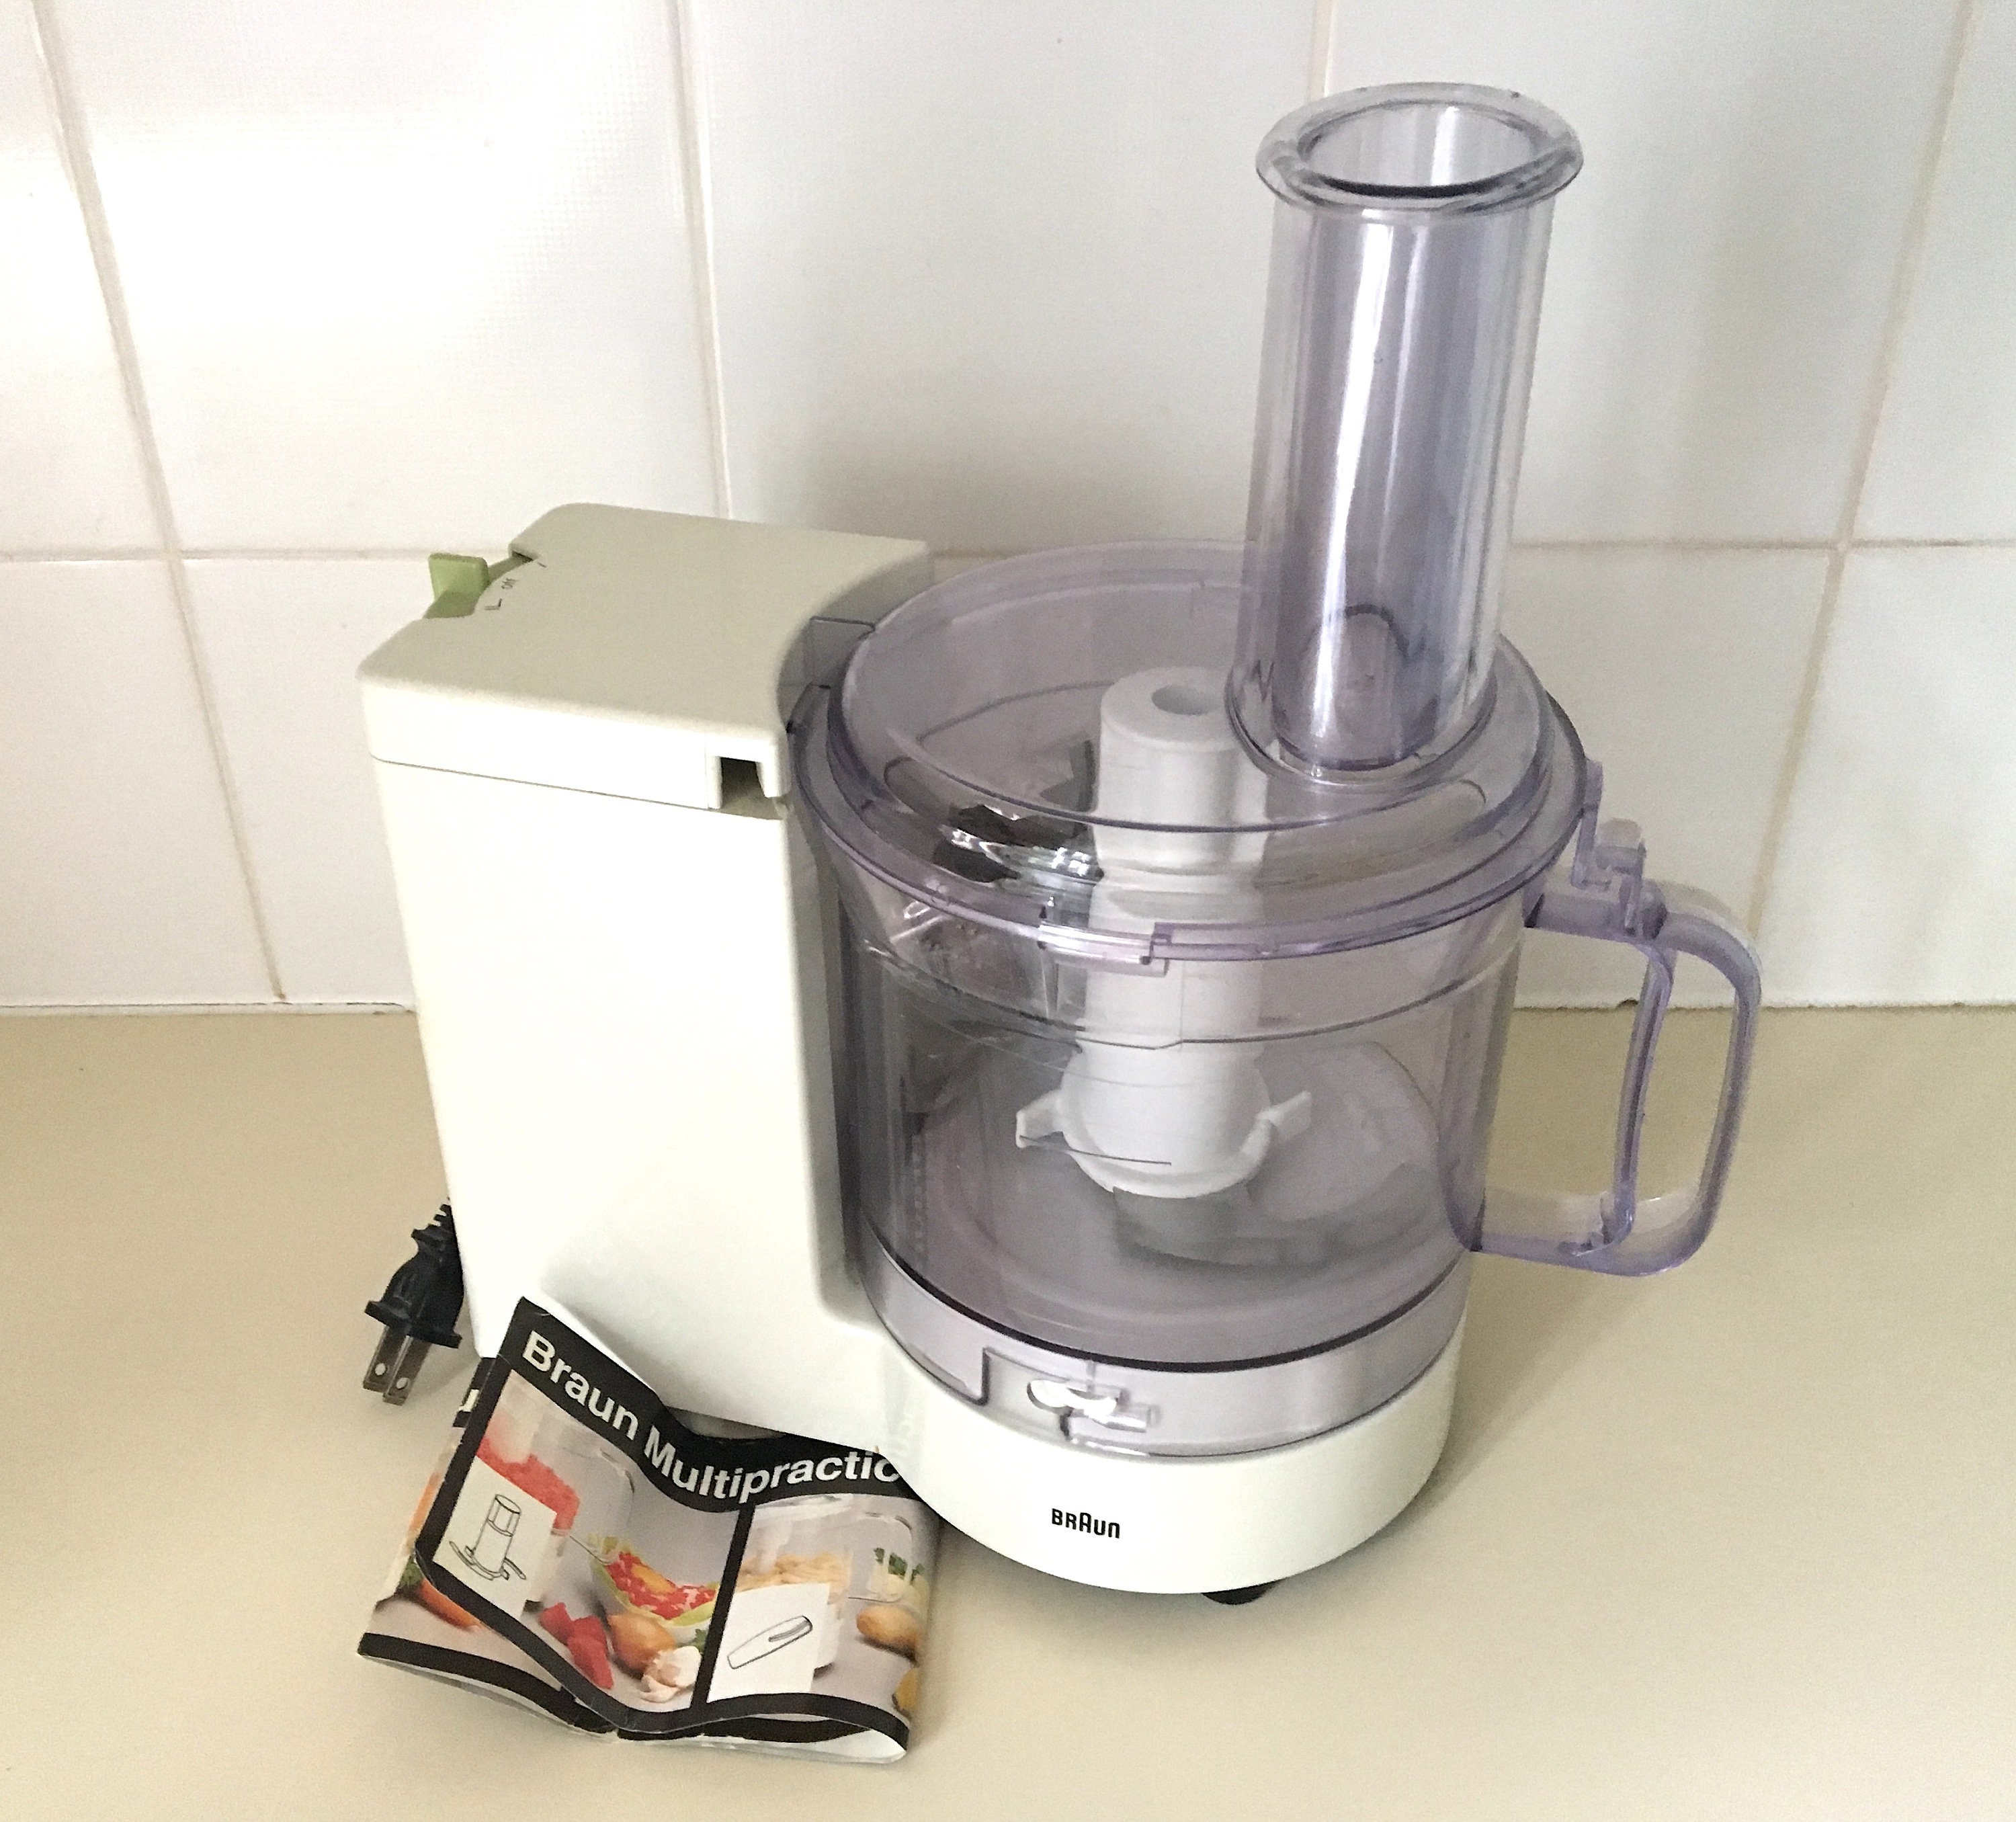 Braun Compact Multipractic Food Processor, Type 4176, Made in Germany,  Includes Food Pusher, Chopping, Grater and Slicing Blades -  India